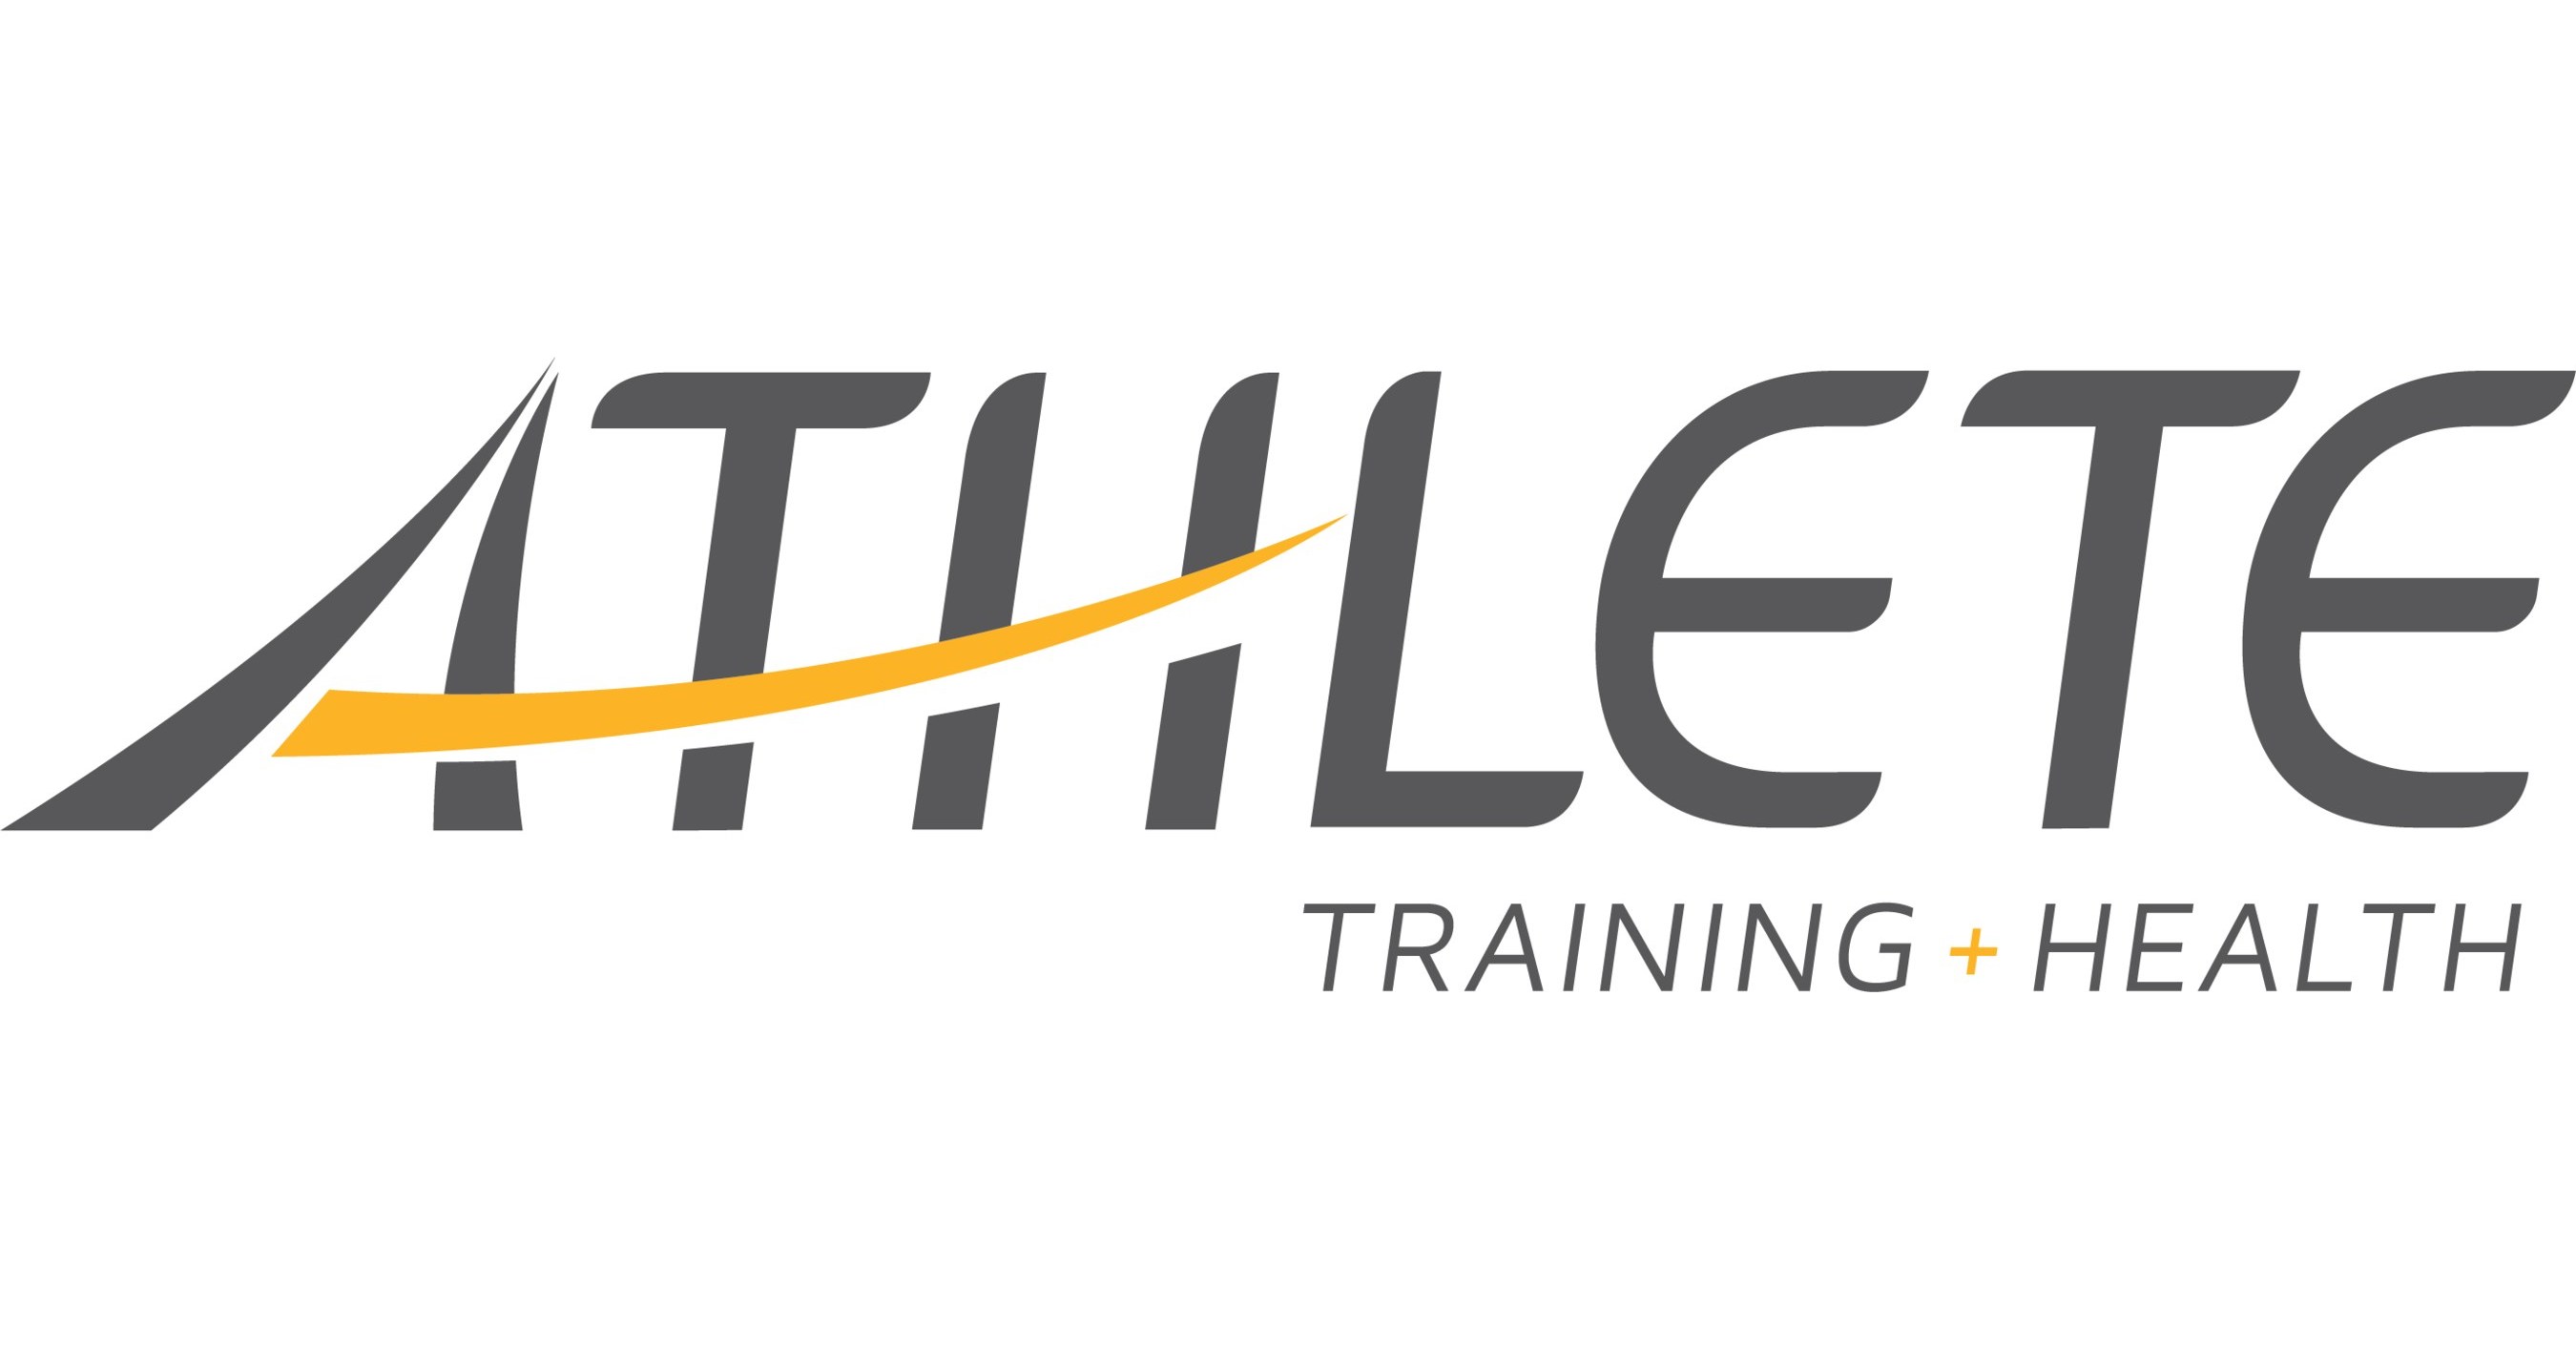 Athlete Training and Health Appoints Leading International Performance ...